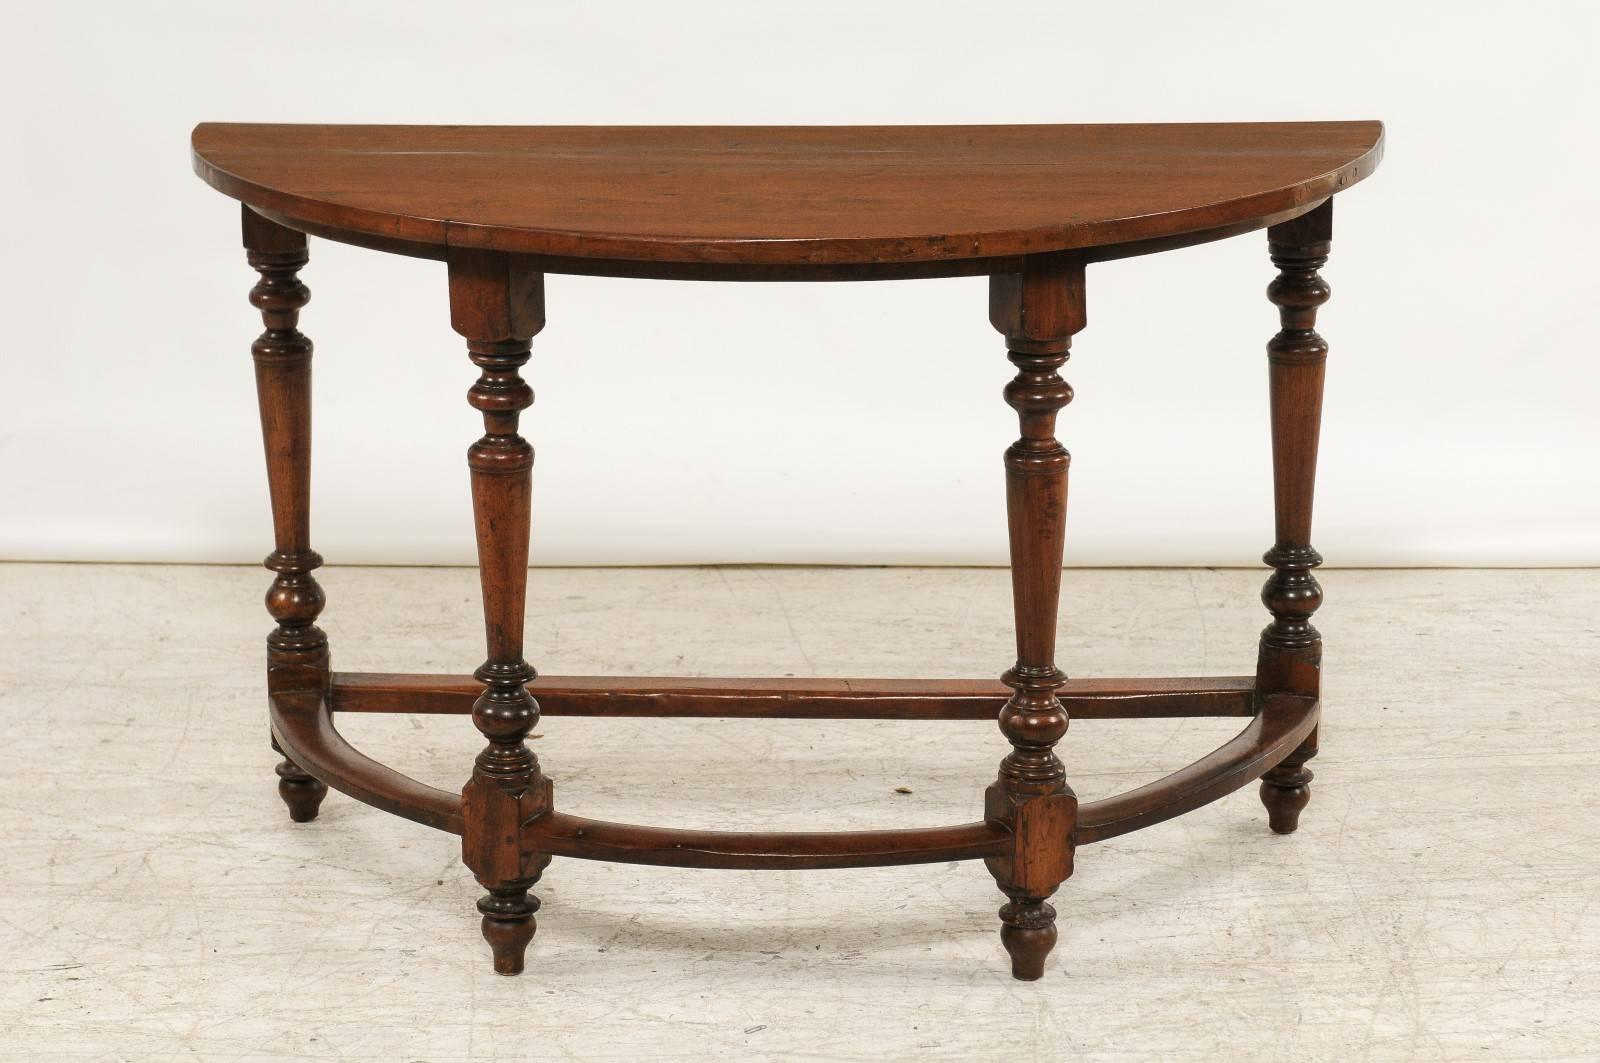 Pair of Large 1820s Italian Walnut Demilune Console Tables with Turned Legs 4